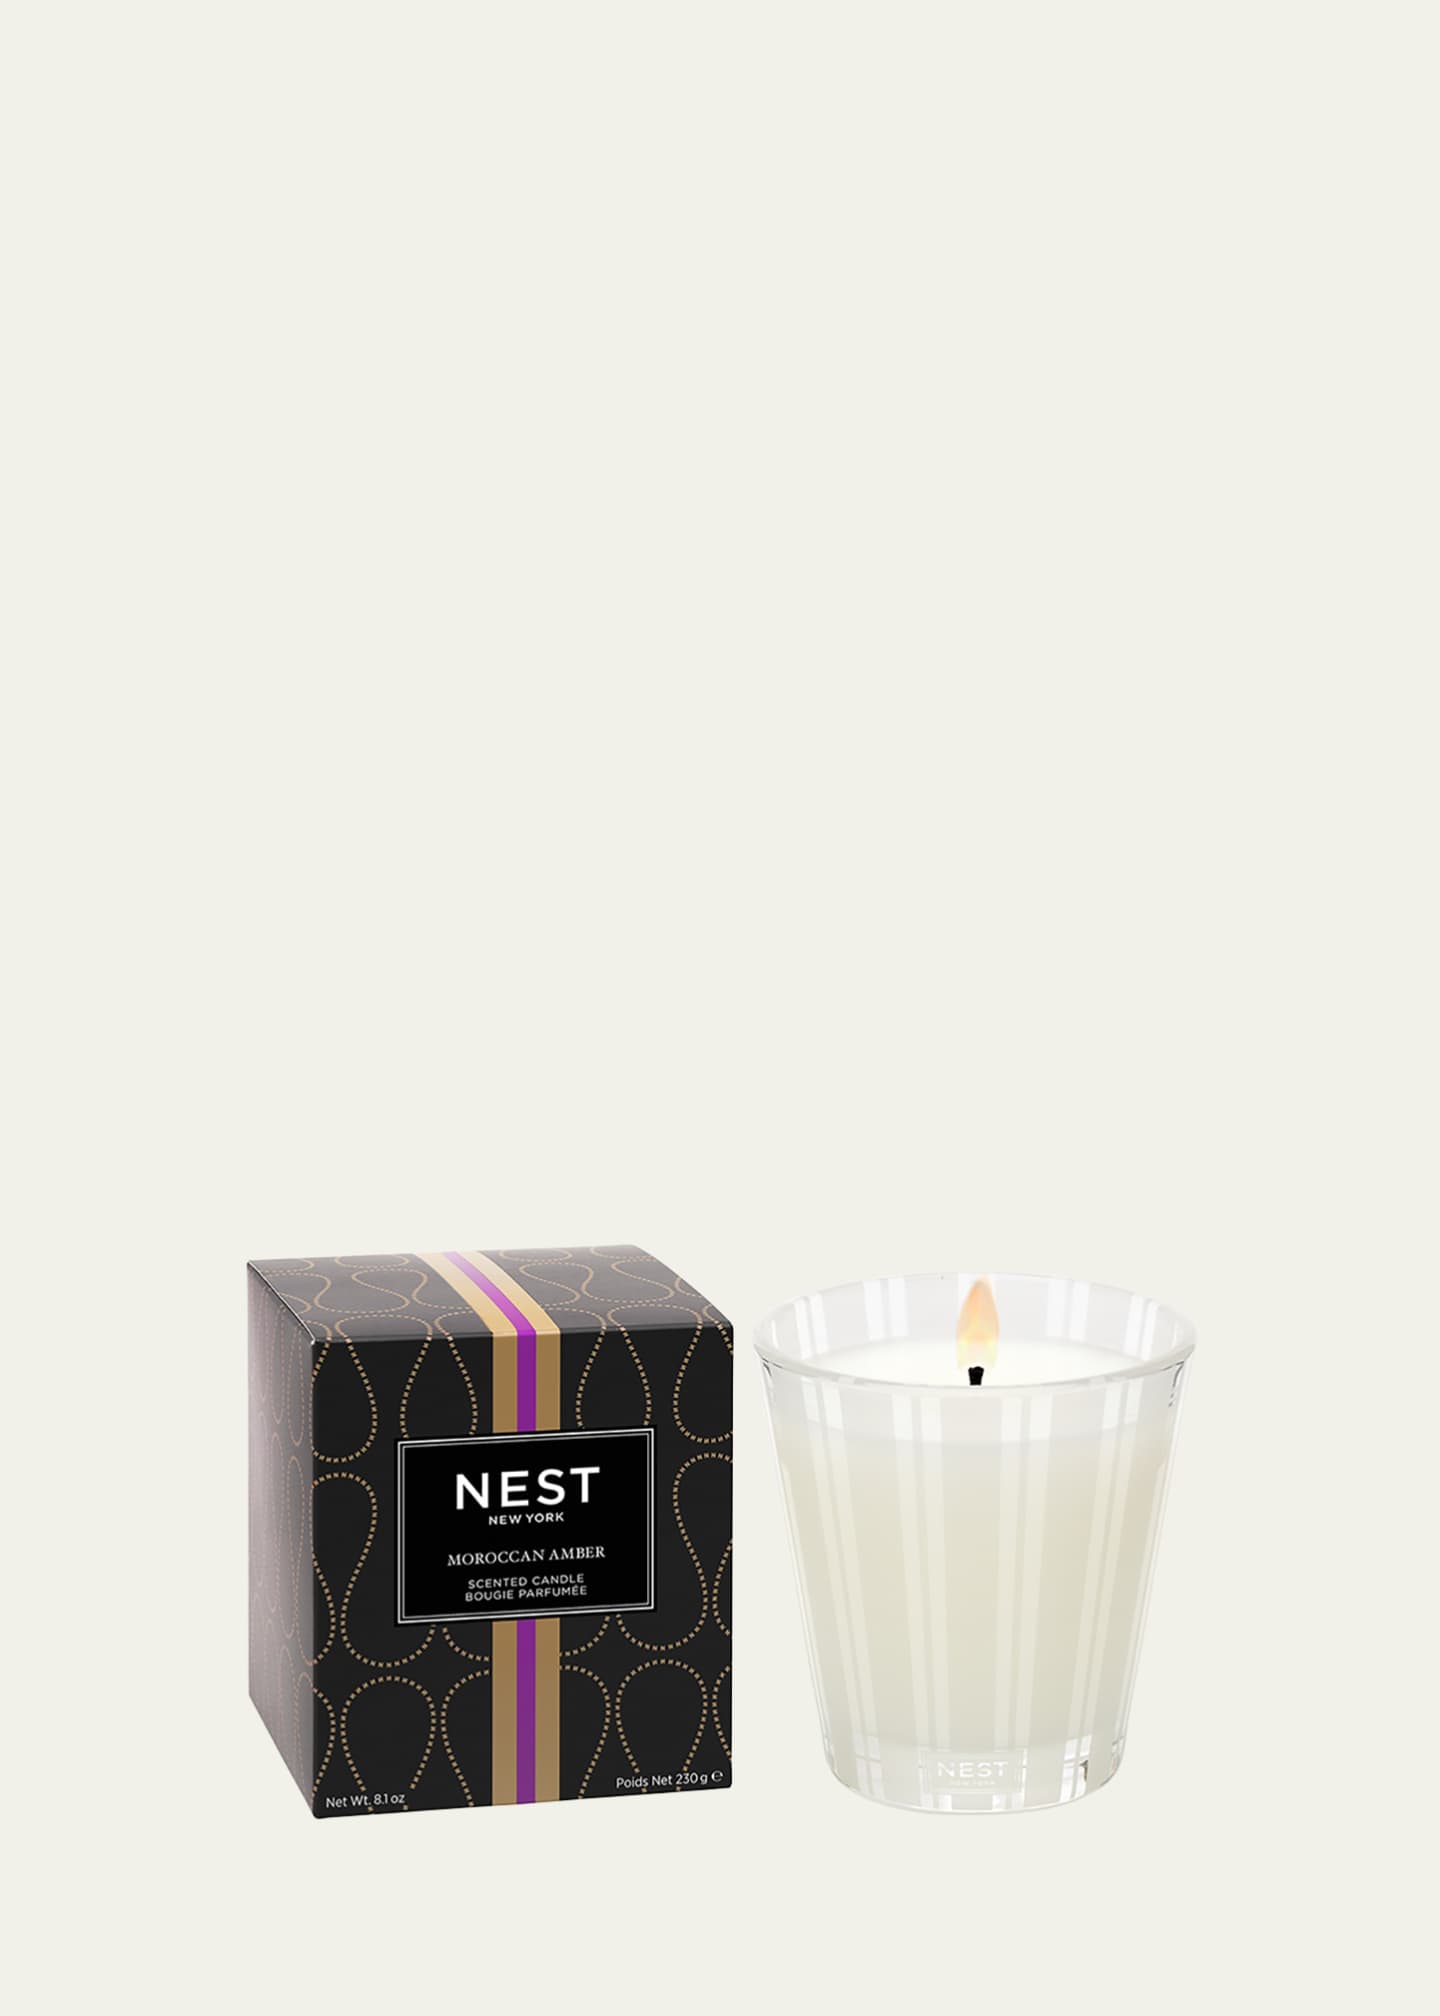 NEST New York Moroccan Amber Scented Candle, 8.1 oz. Image 1 of 5